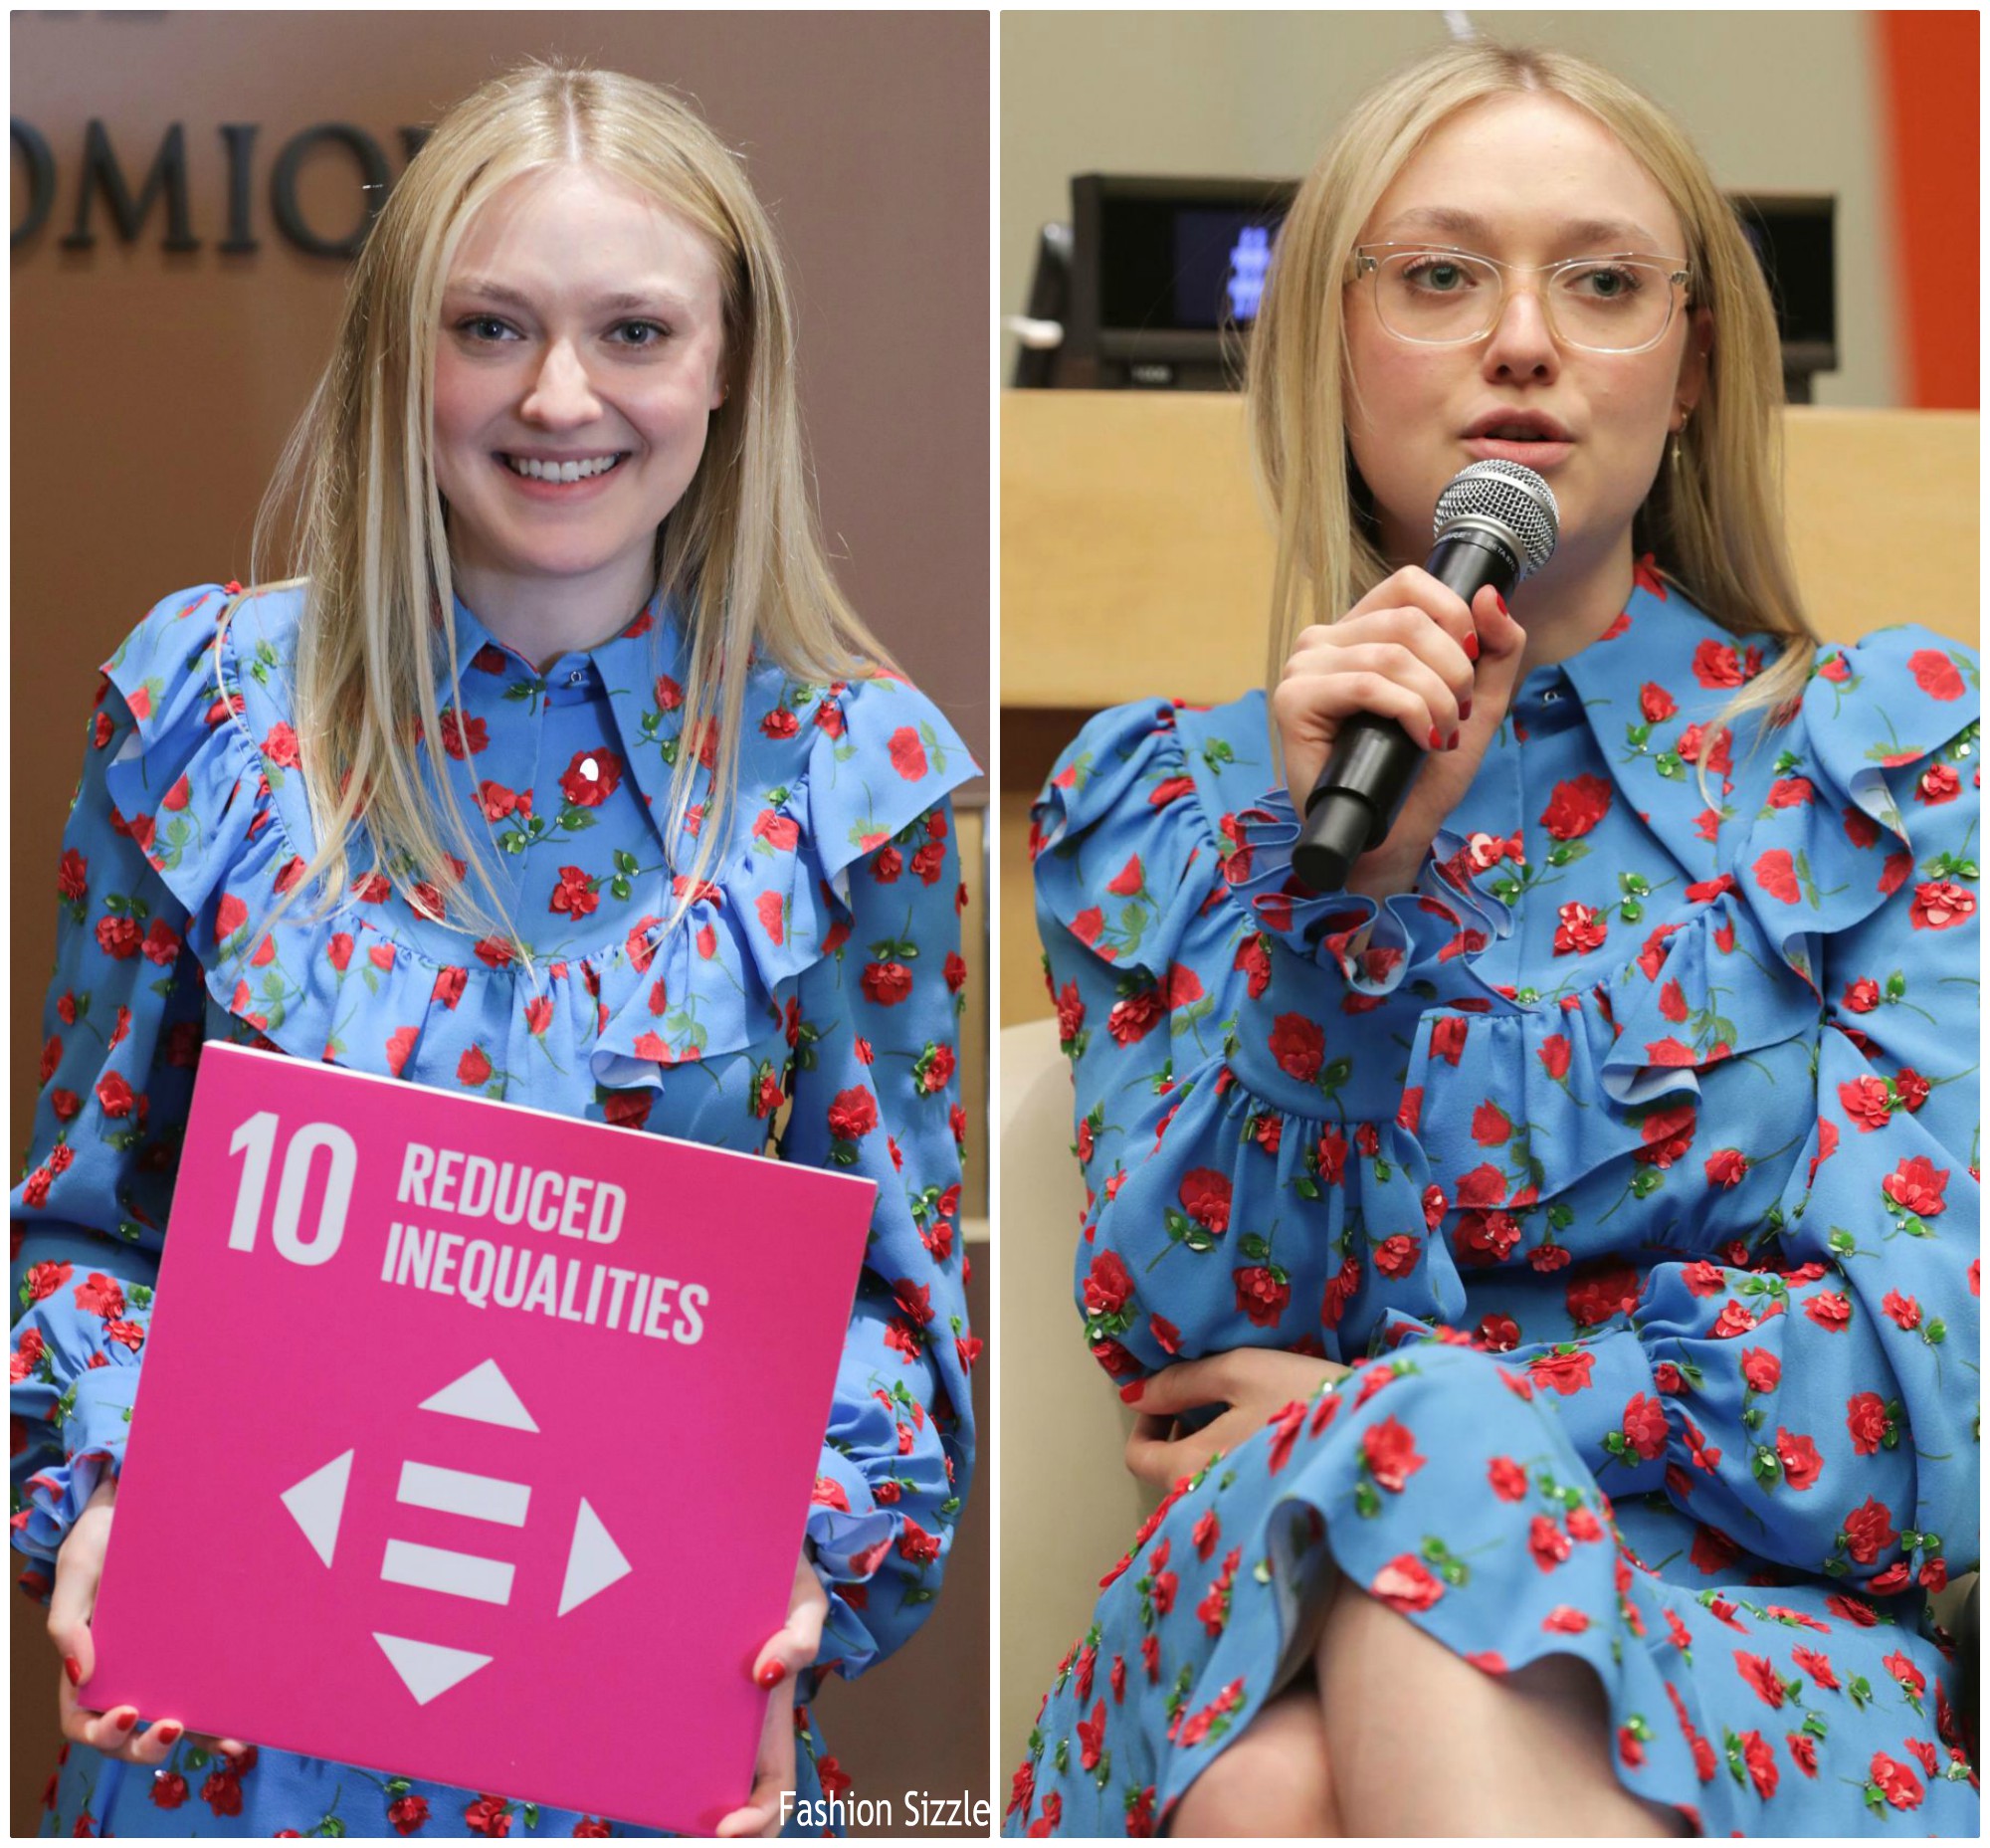 dakota-fanning-speaks-at-the-united nations-world-autism-day-meetings-in-new-york